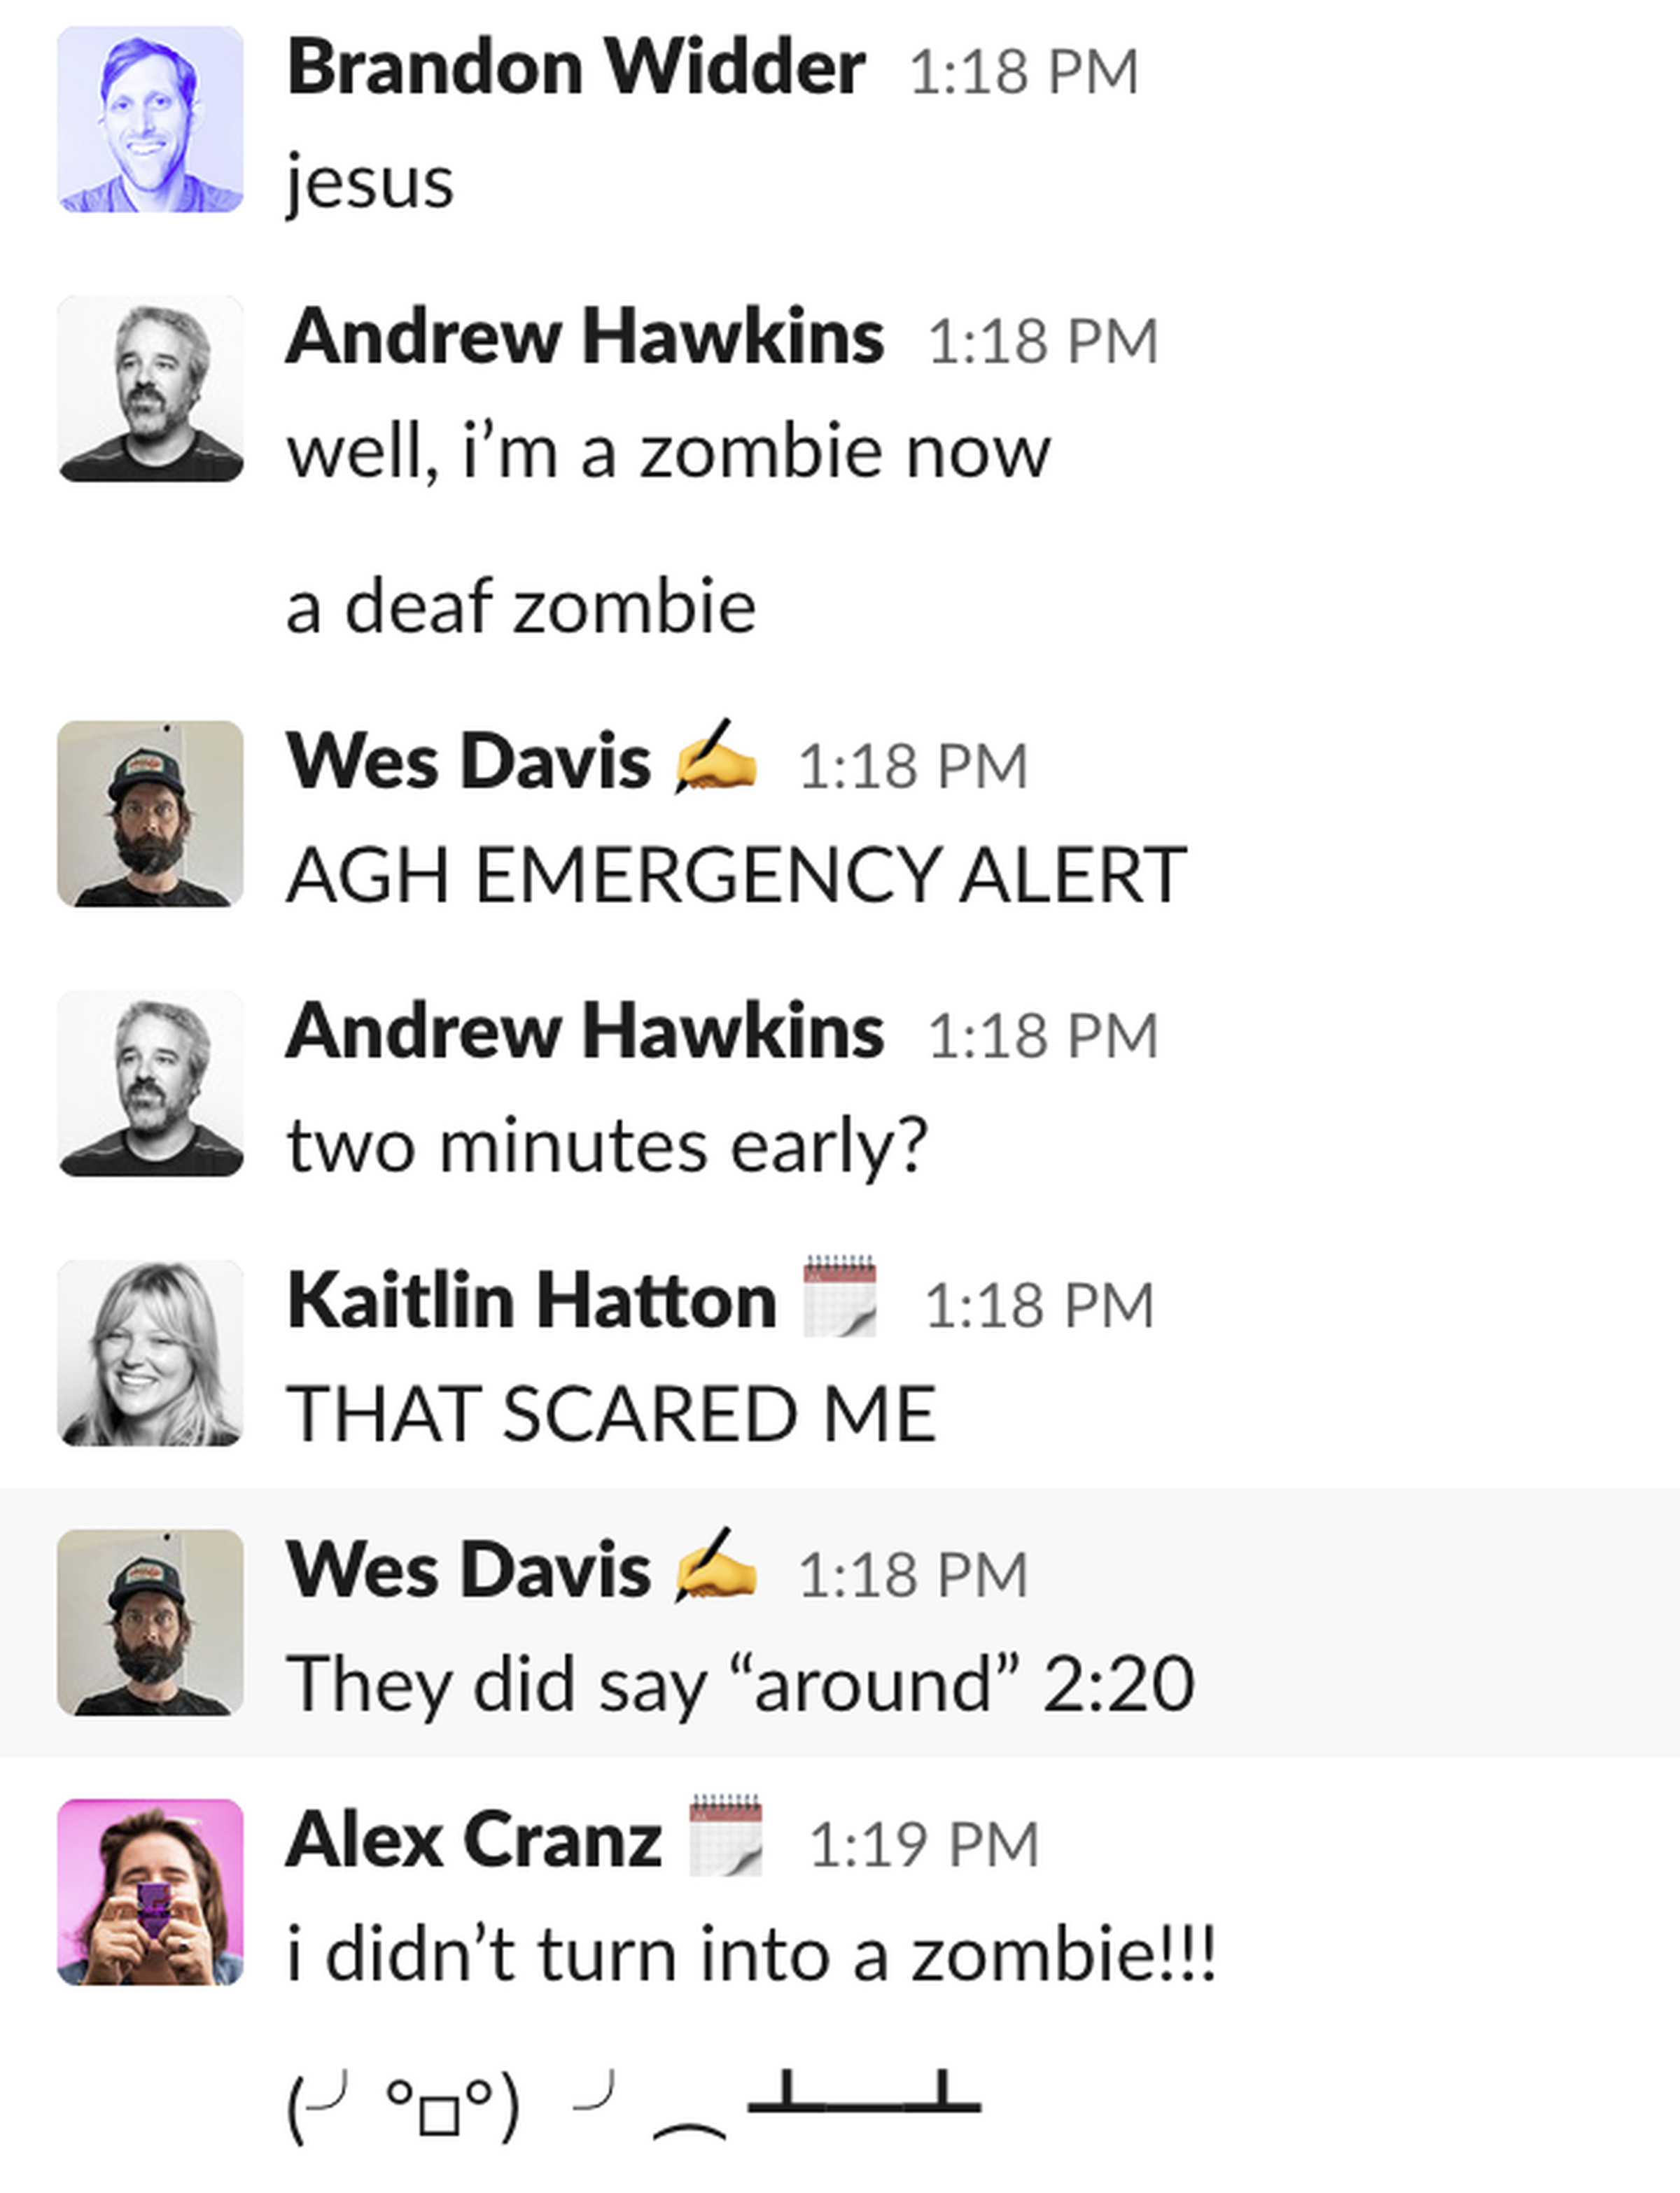 A screenshot of a Slack conversation. It contains messages saying “well, I’m a zombie now — a deaf zombie,” “AGH EMERGENCY ALERT,” and “THAT SCARED ME.”